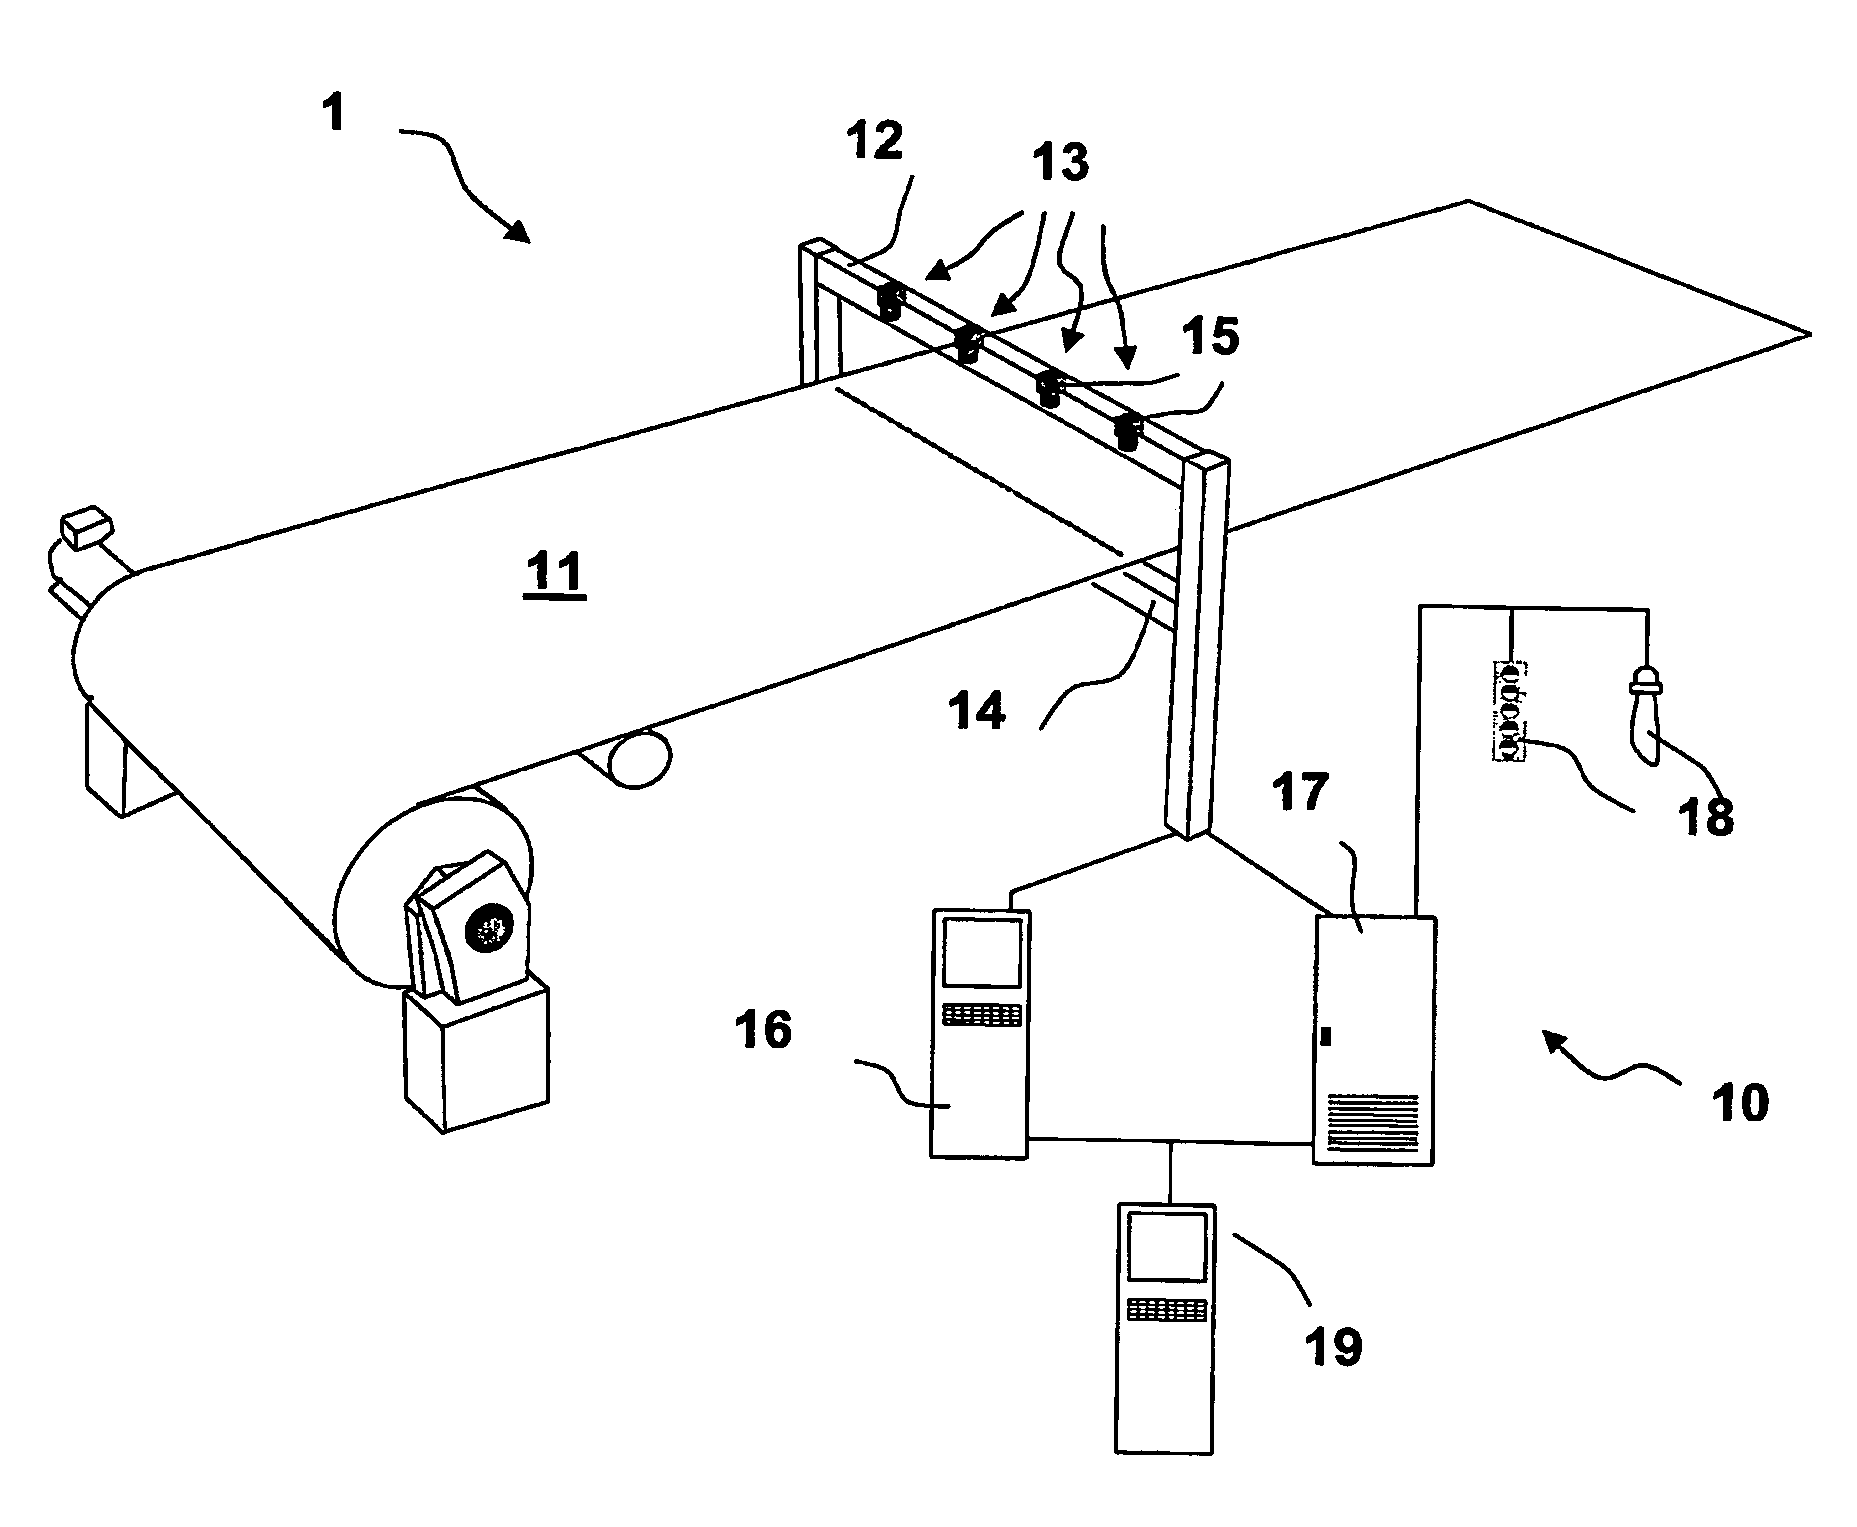 Method and product for detecting abnormalities